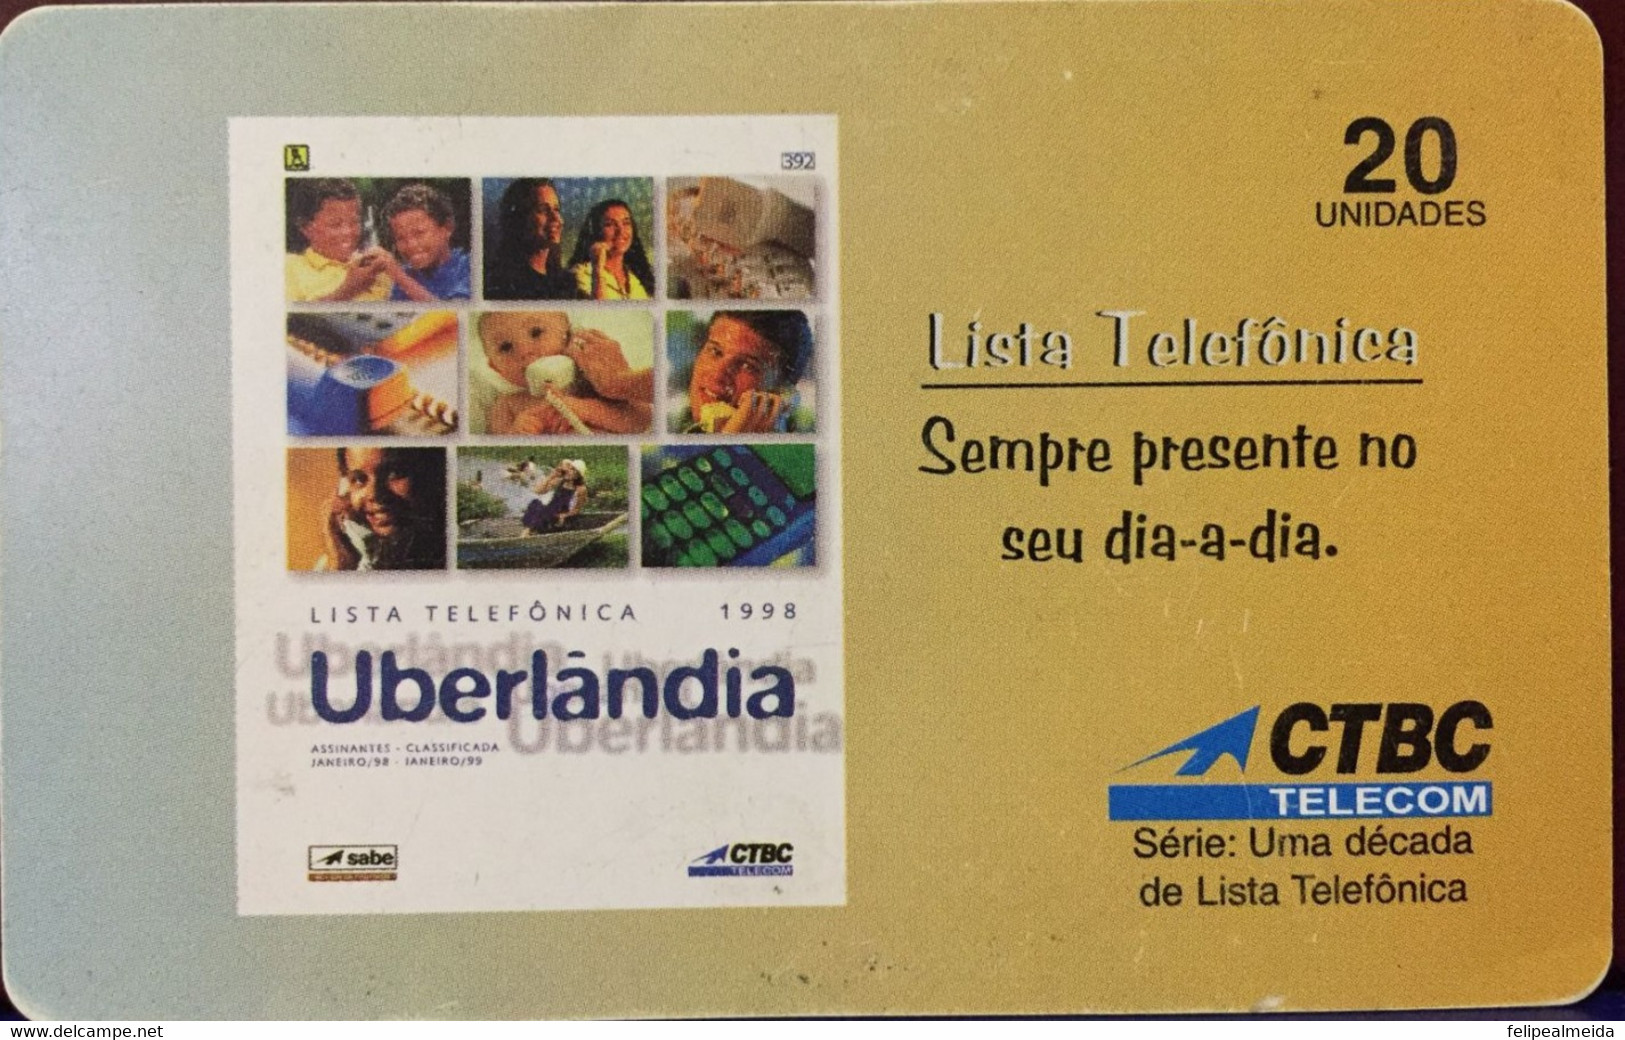 Phone Card Manufactured By CTBC Telecom In 1998 - Phonebook Always Present In Your Daily Life - Telecom Operators